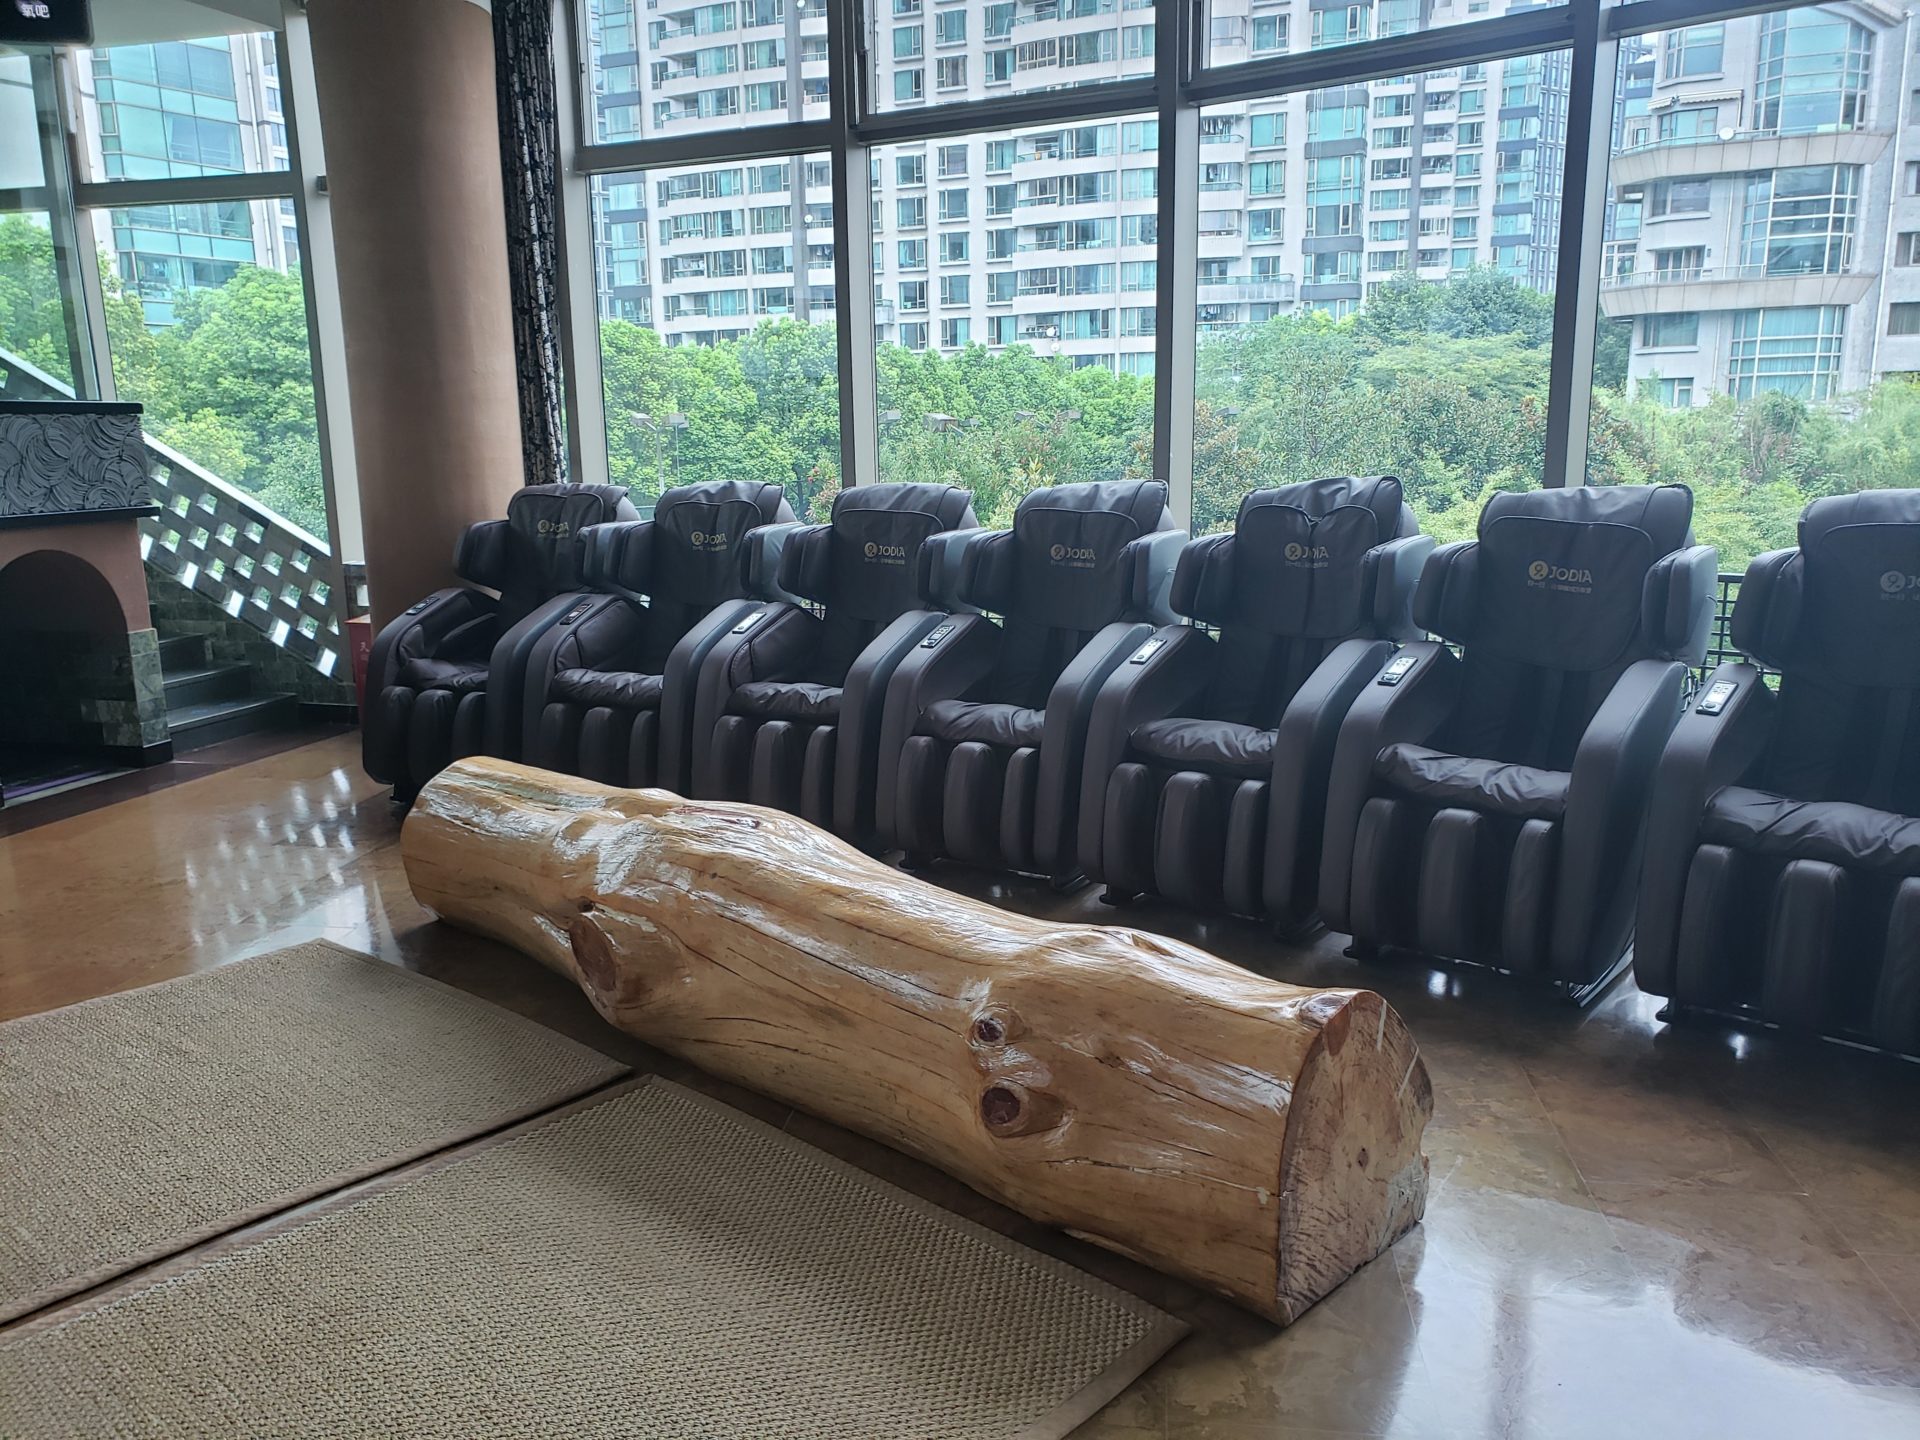 a large log in a room with chairs and a rug